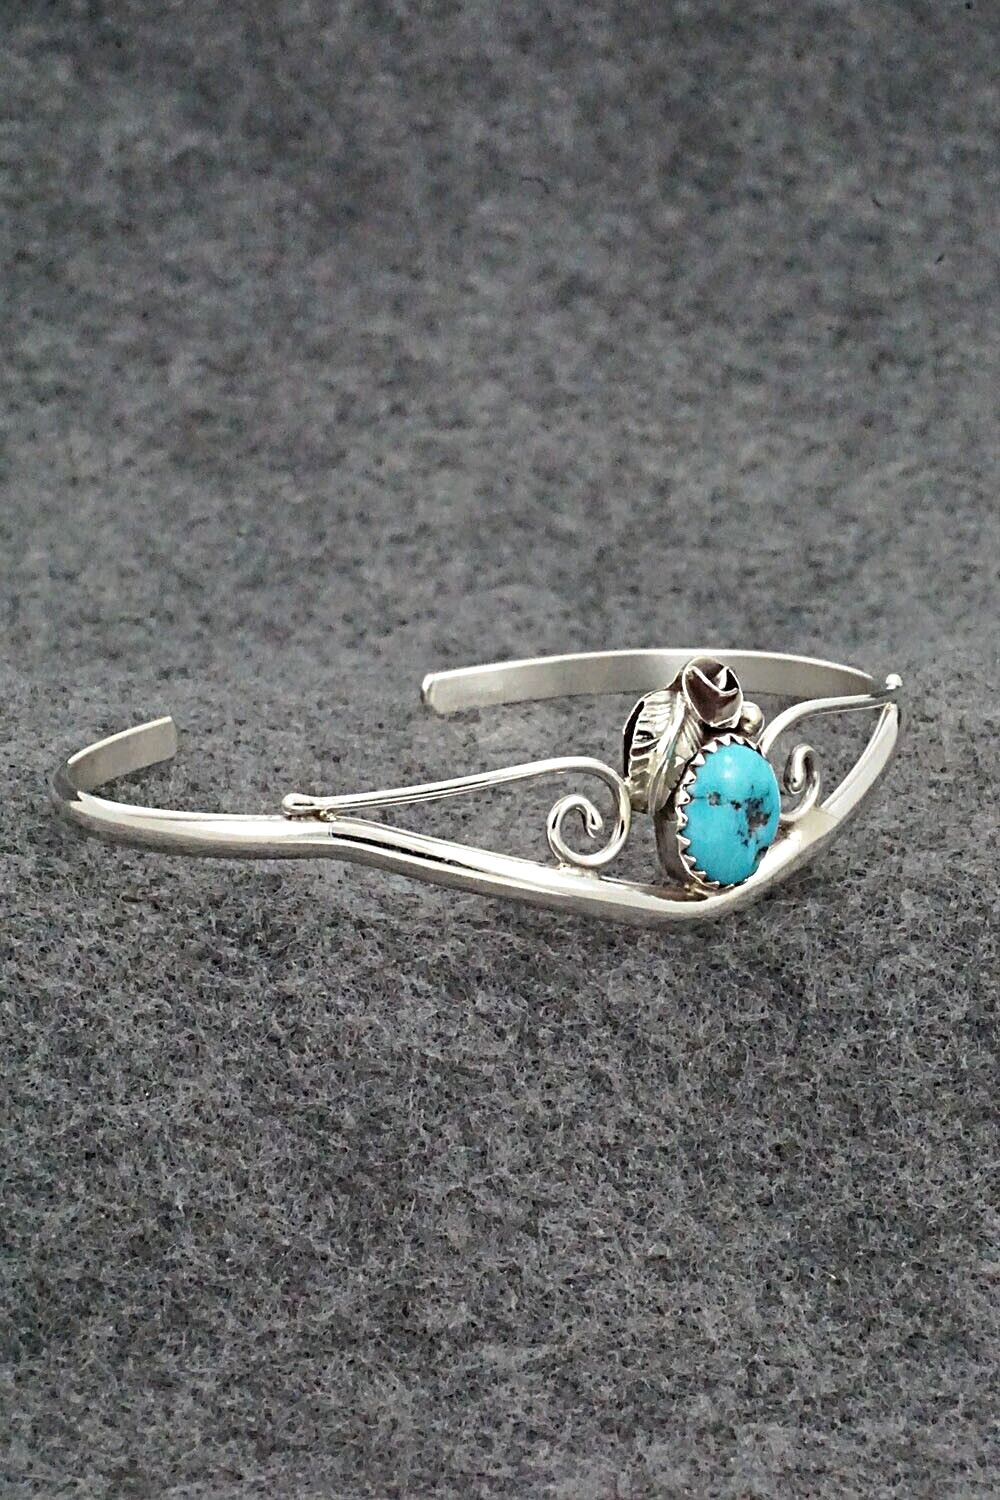 Turquoise & Sterling Silver Bracelet - Max Calladitto